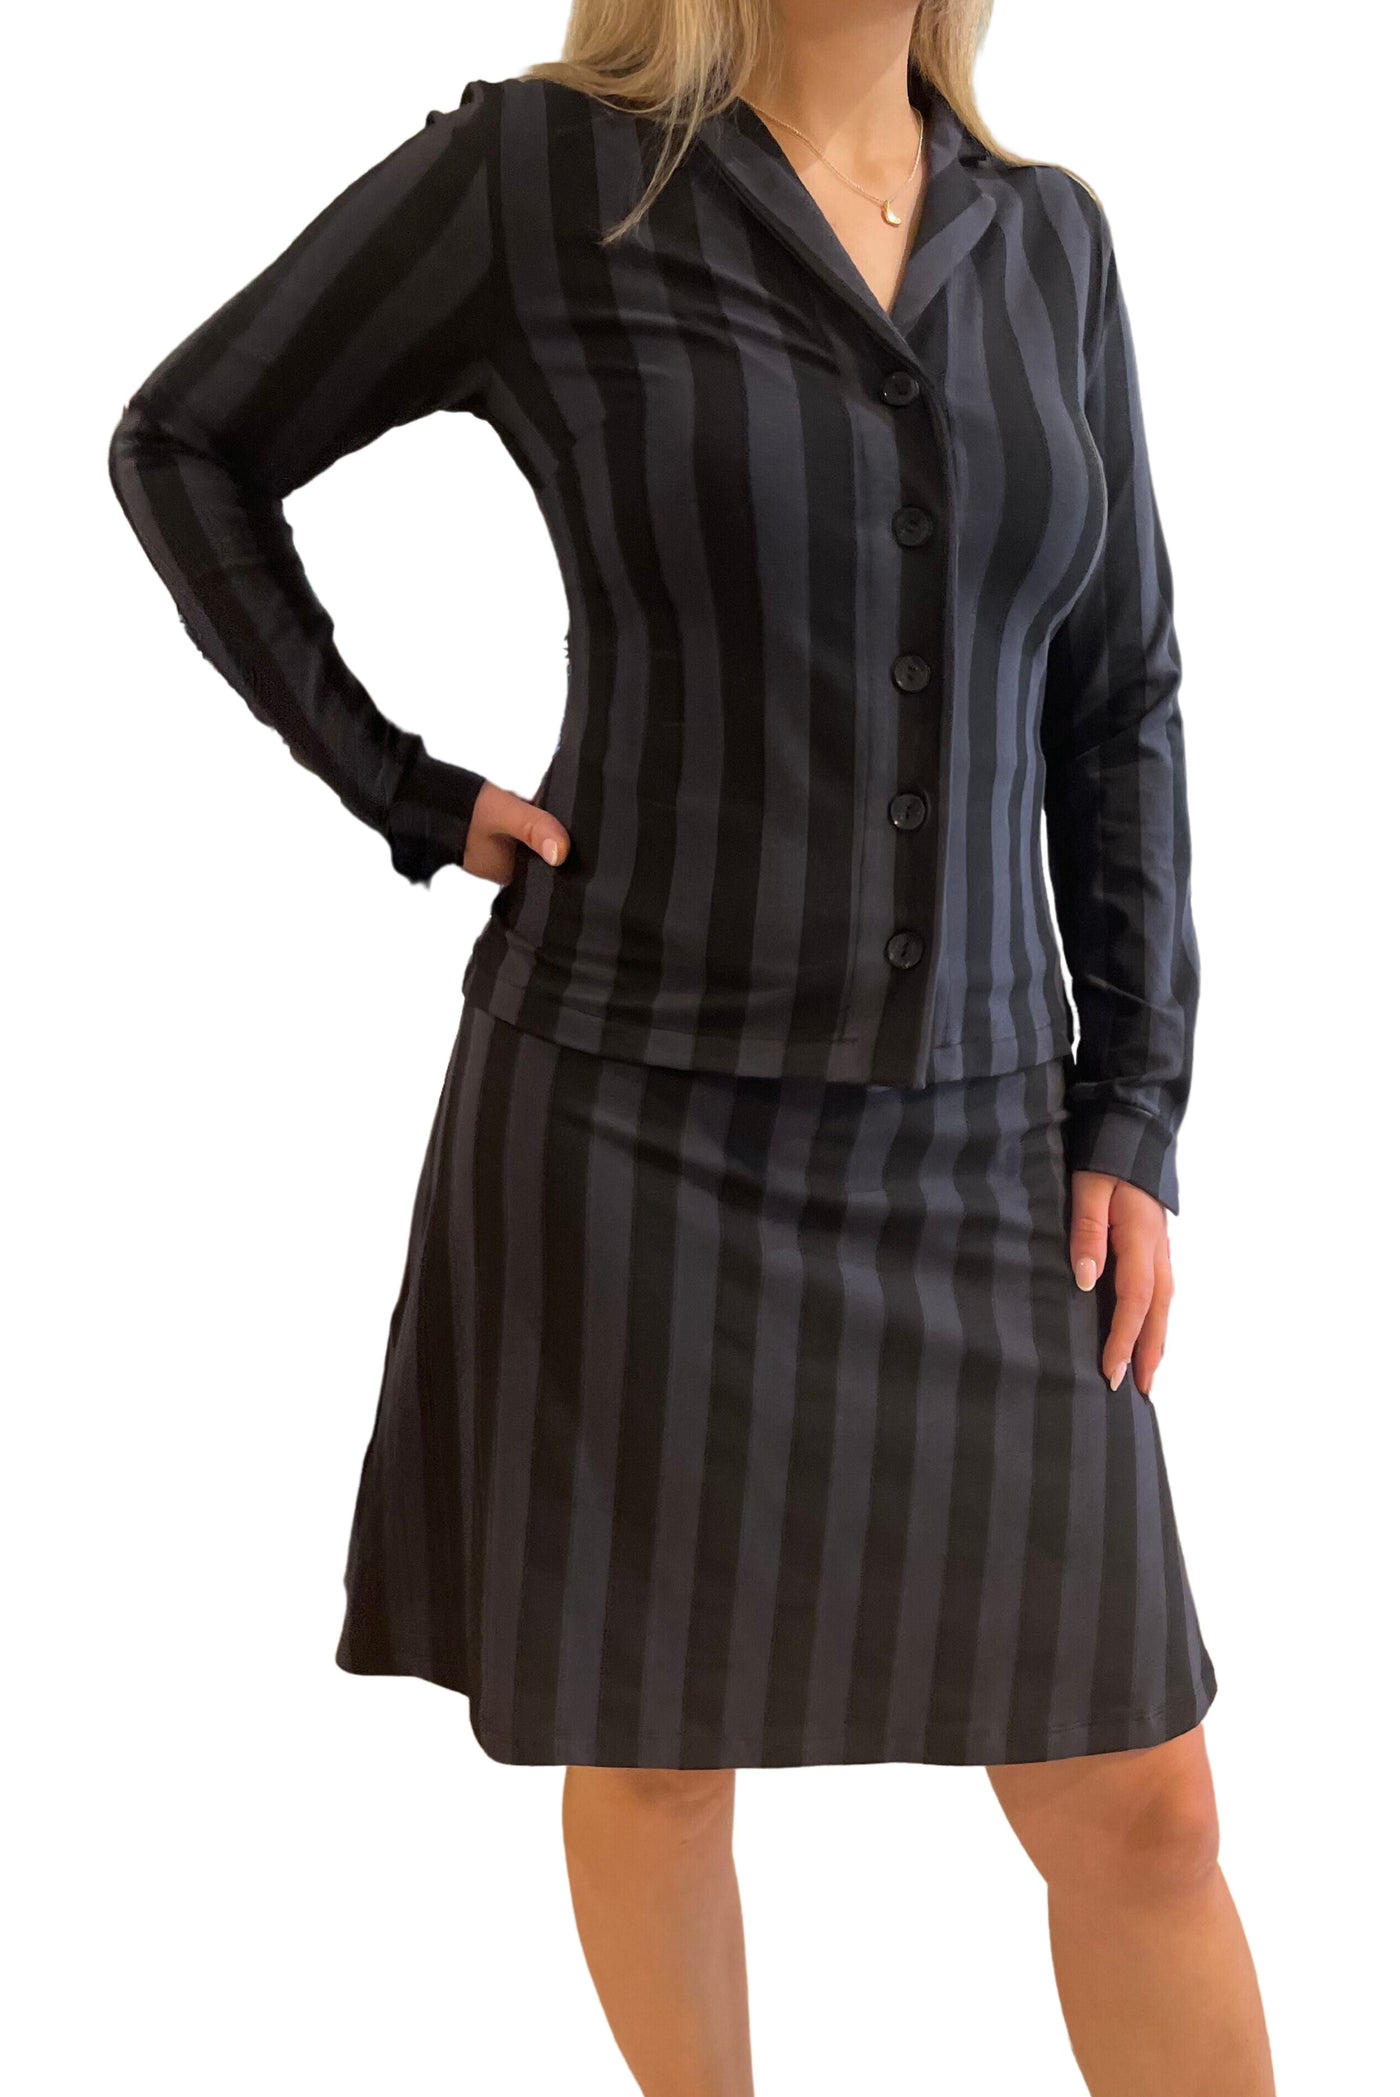 Zilch Skirt Wide in Stripes Black-Womens-Ohh! By Gum - Shop Sustainable